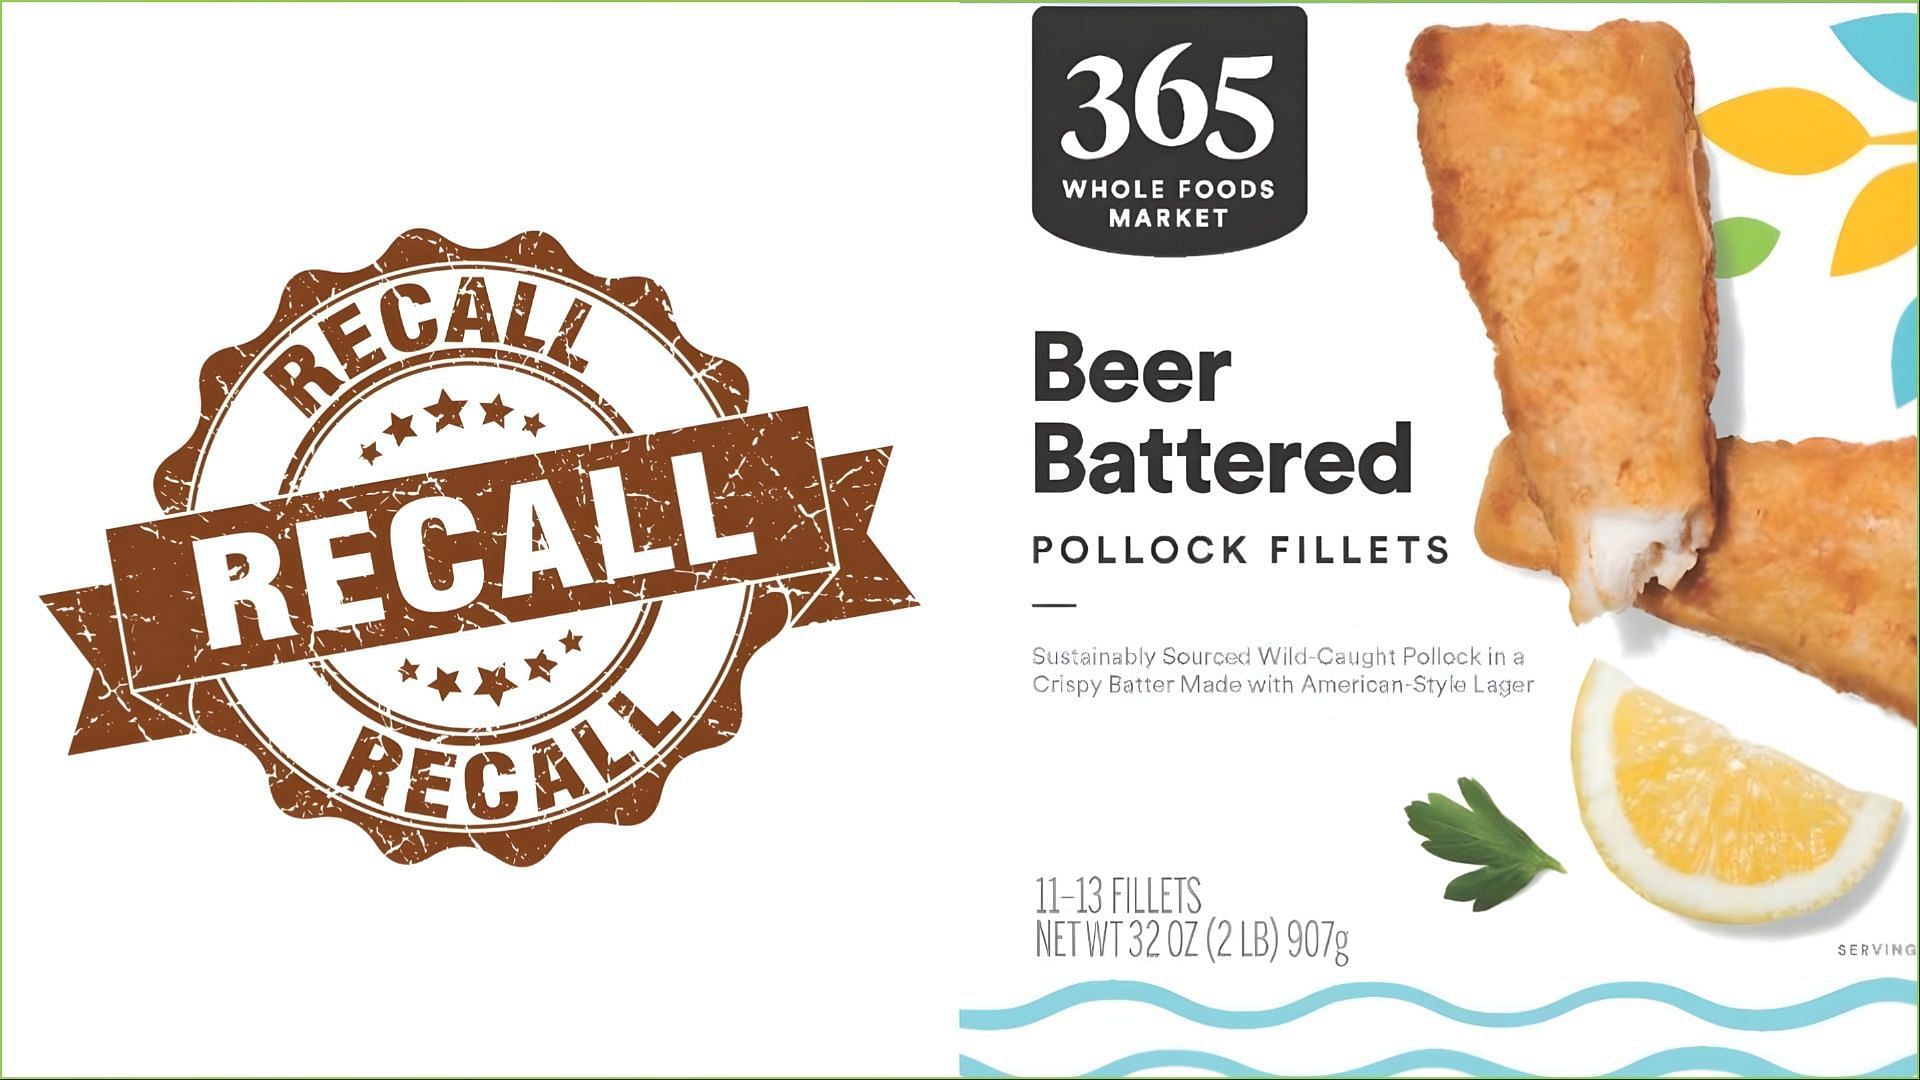 Tampa Bay Fisheries recalls fish fillets over undeclared soy allergens (Image via FDA)